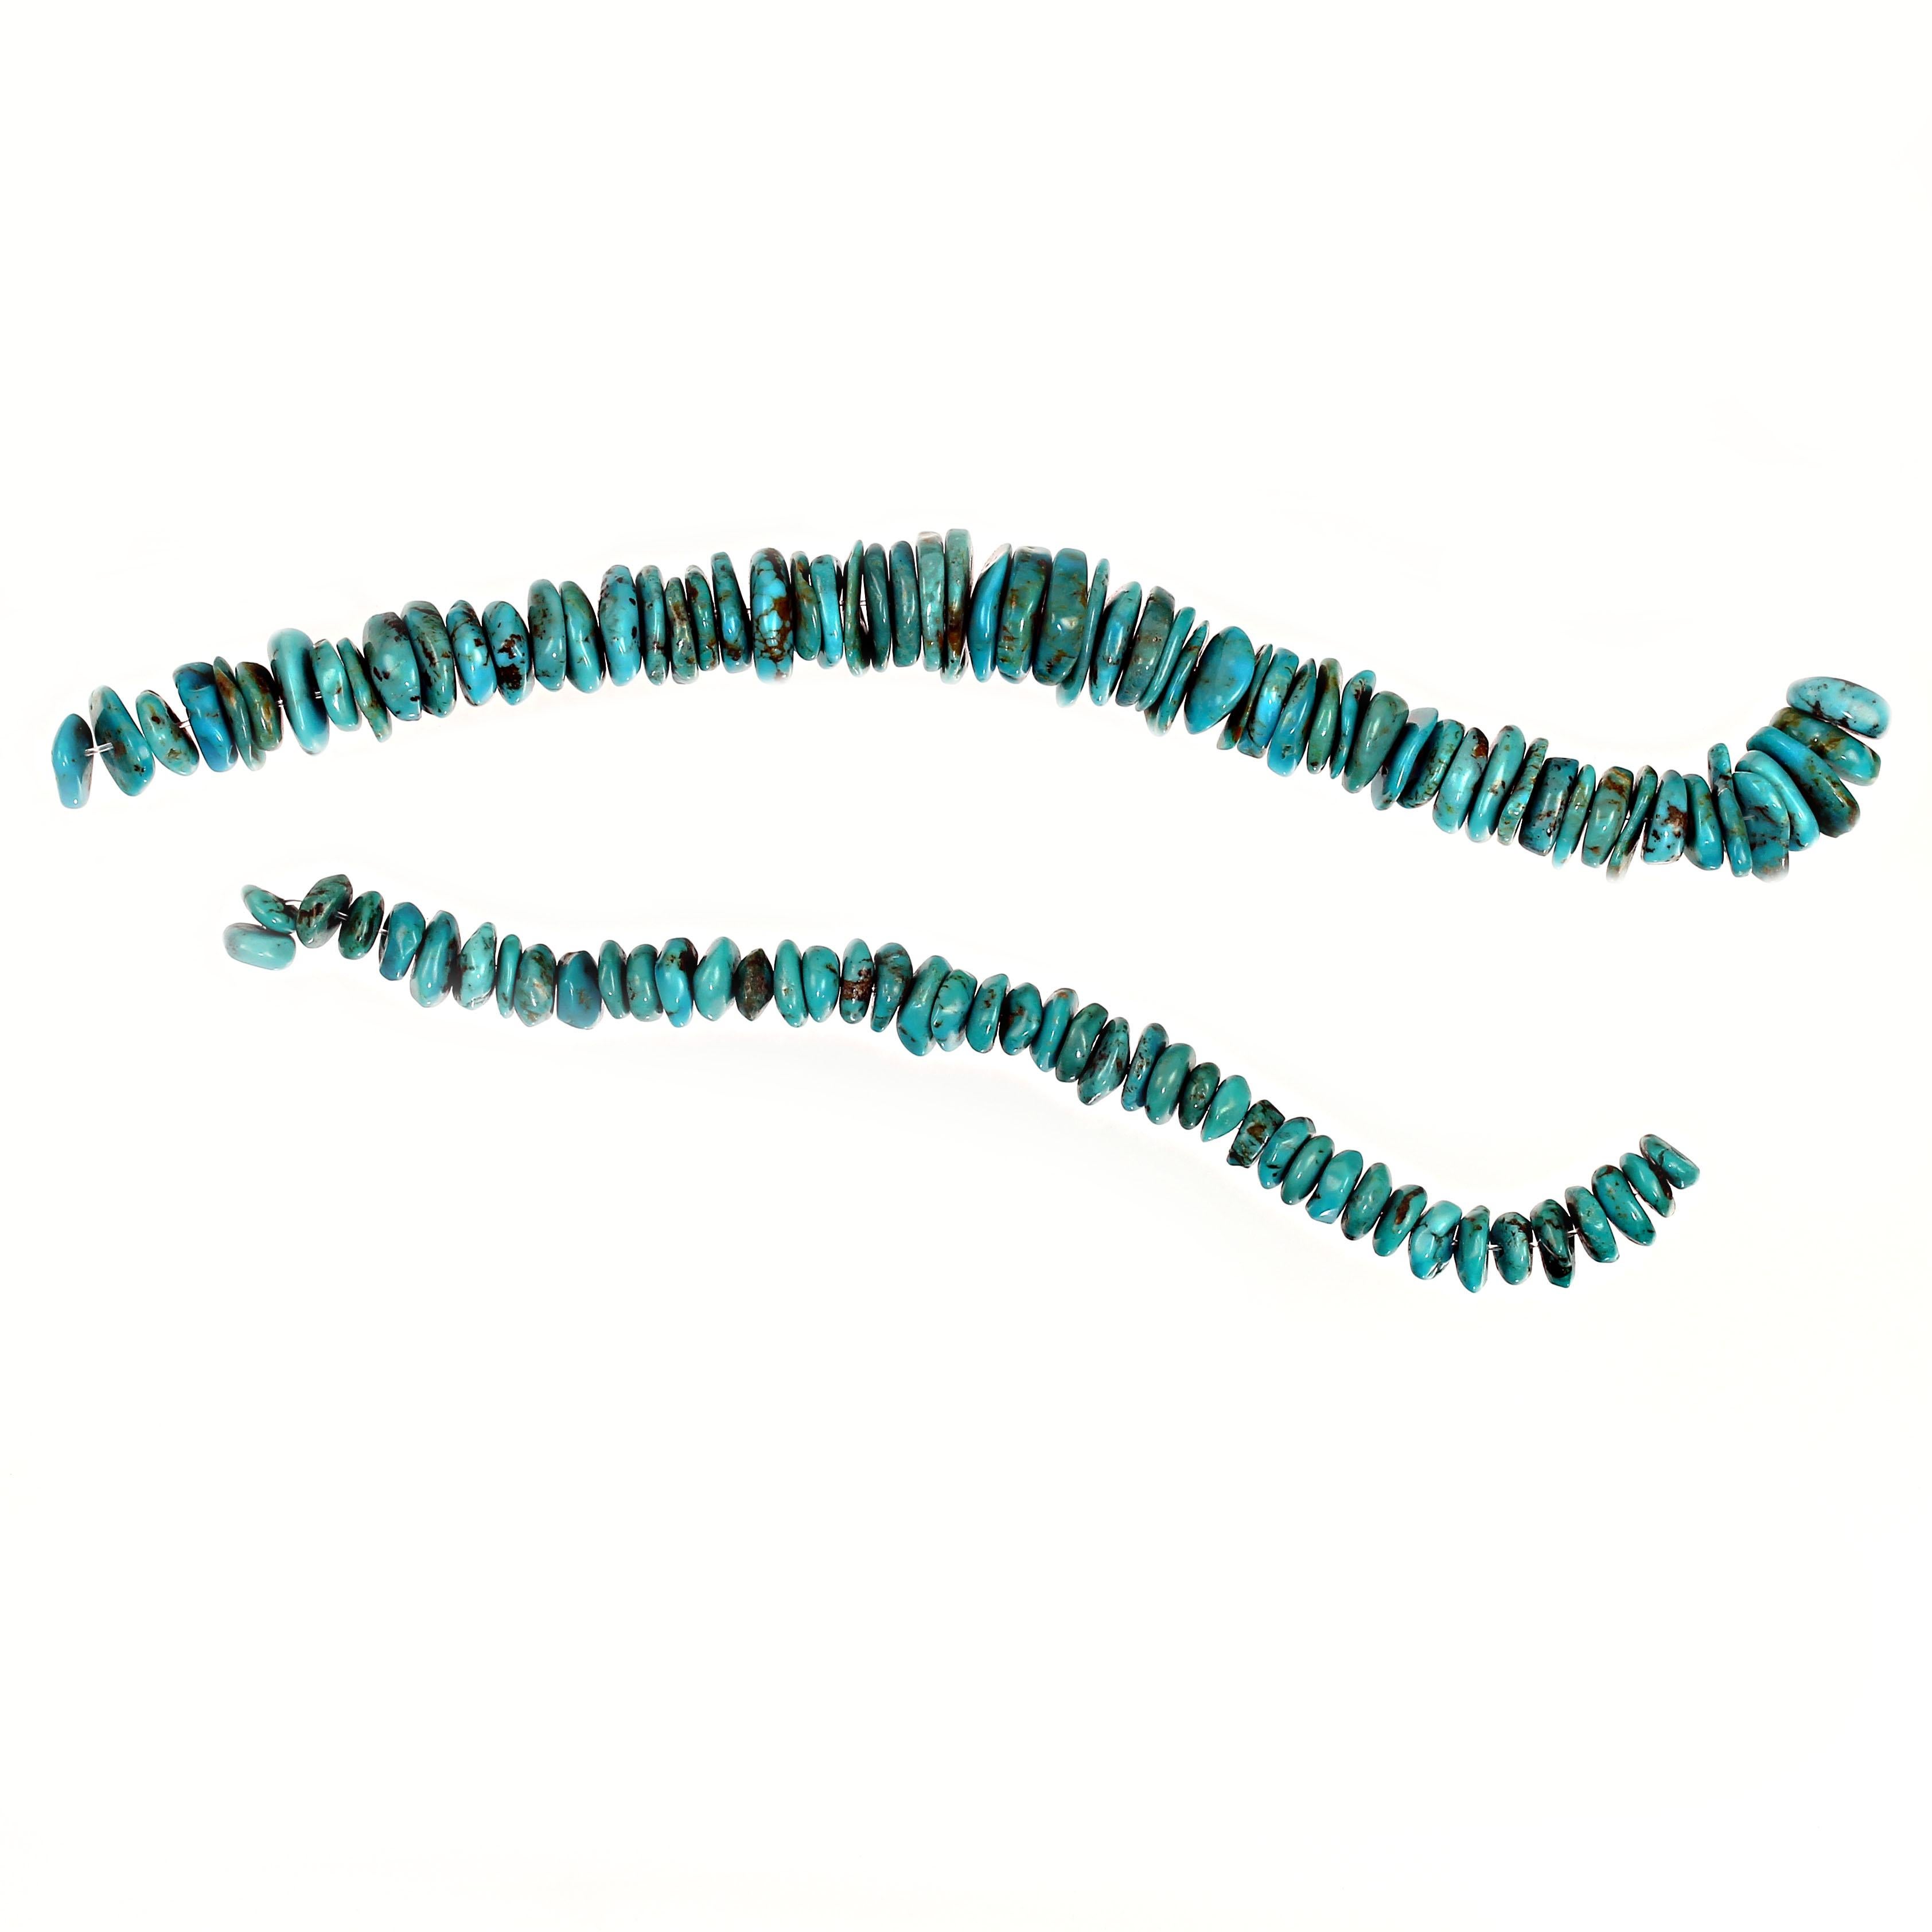 Bead AJD Hubei Turquoise Slices for jewelry